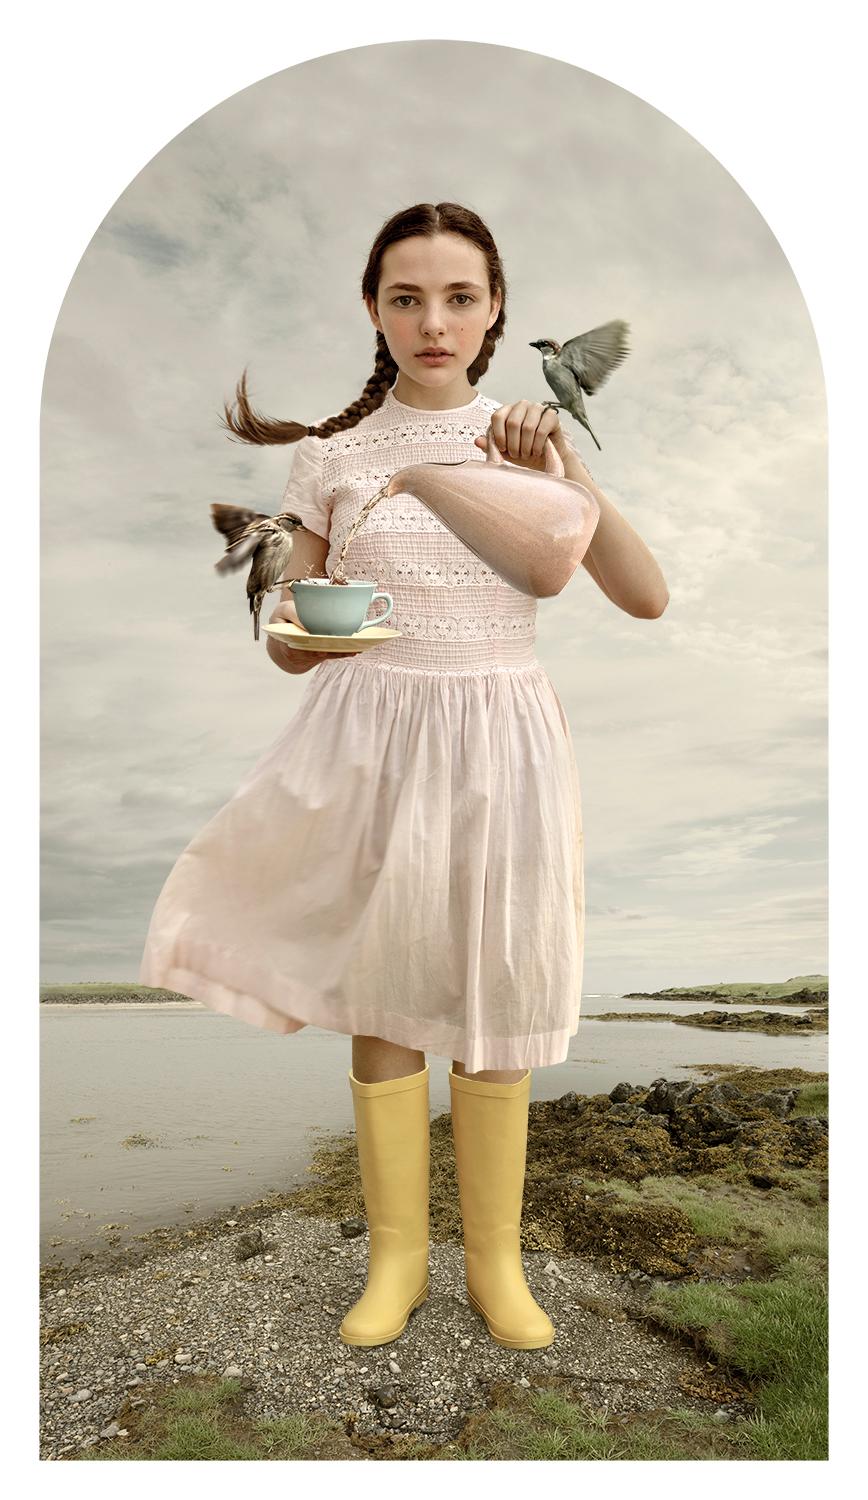 Tom Chambers Portrait Photograph - Tea For Two, limited edition photograph, archival pigment, signed and numbered